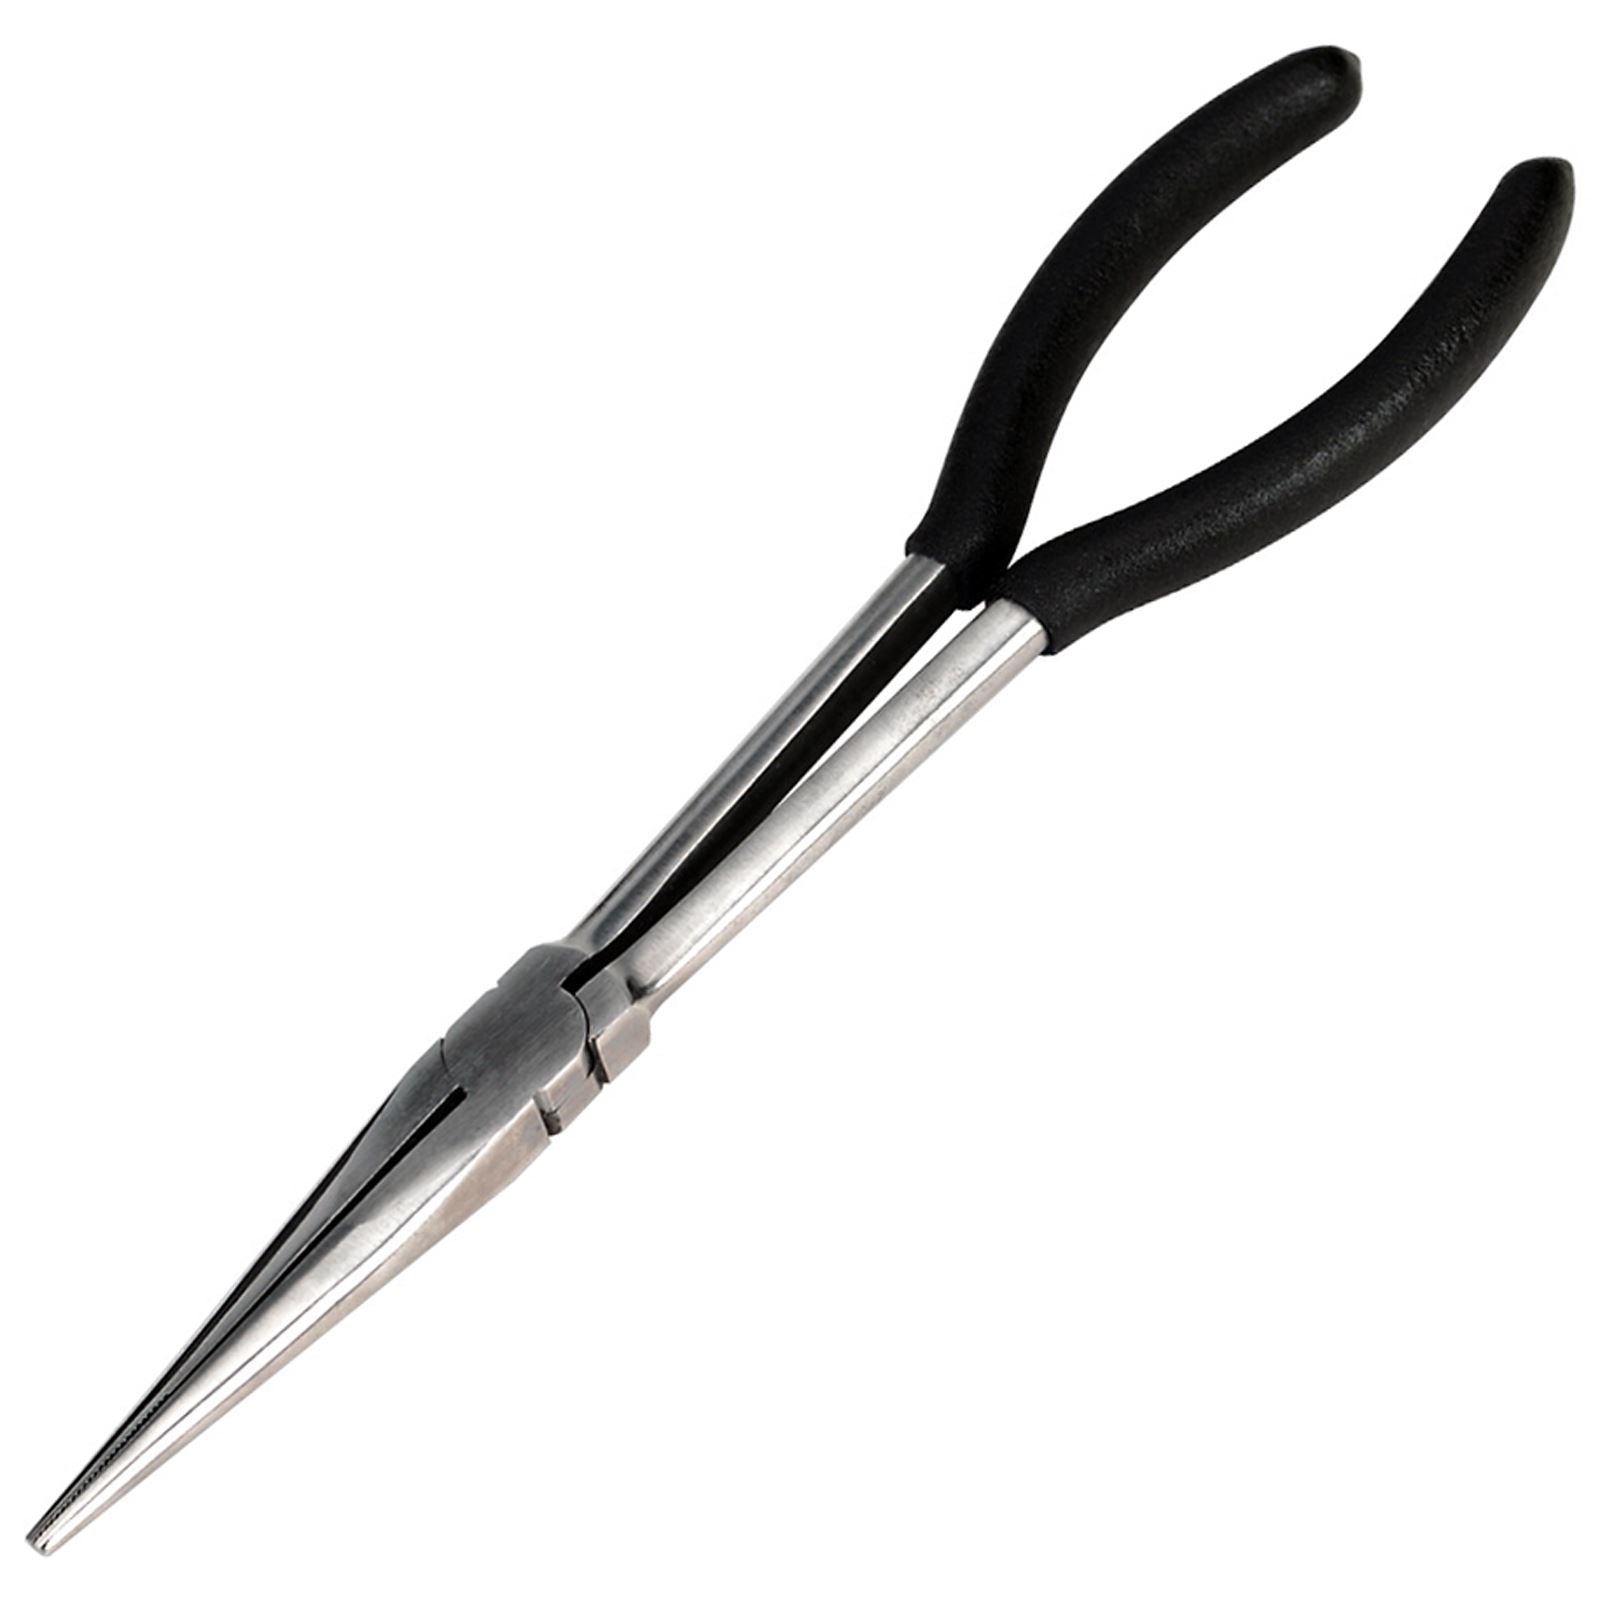 Siegen 280mm Straight Needle Nose Pliers Cushion Grip Handles Polished Finish